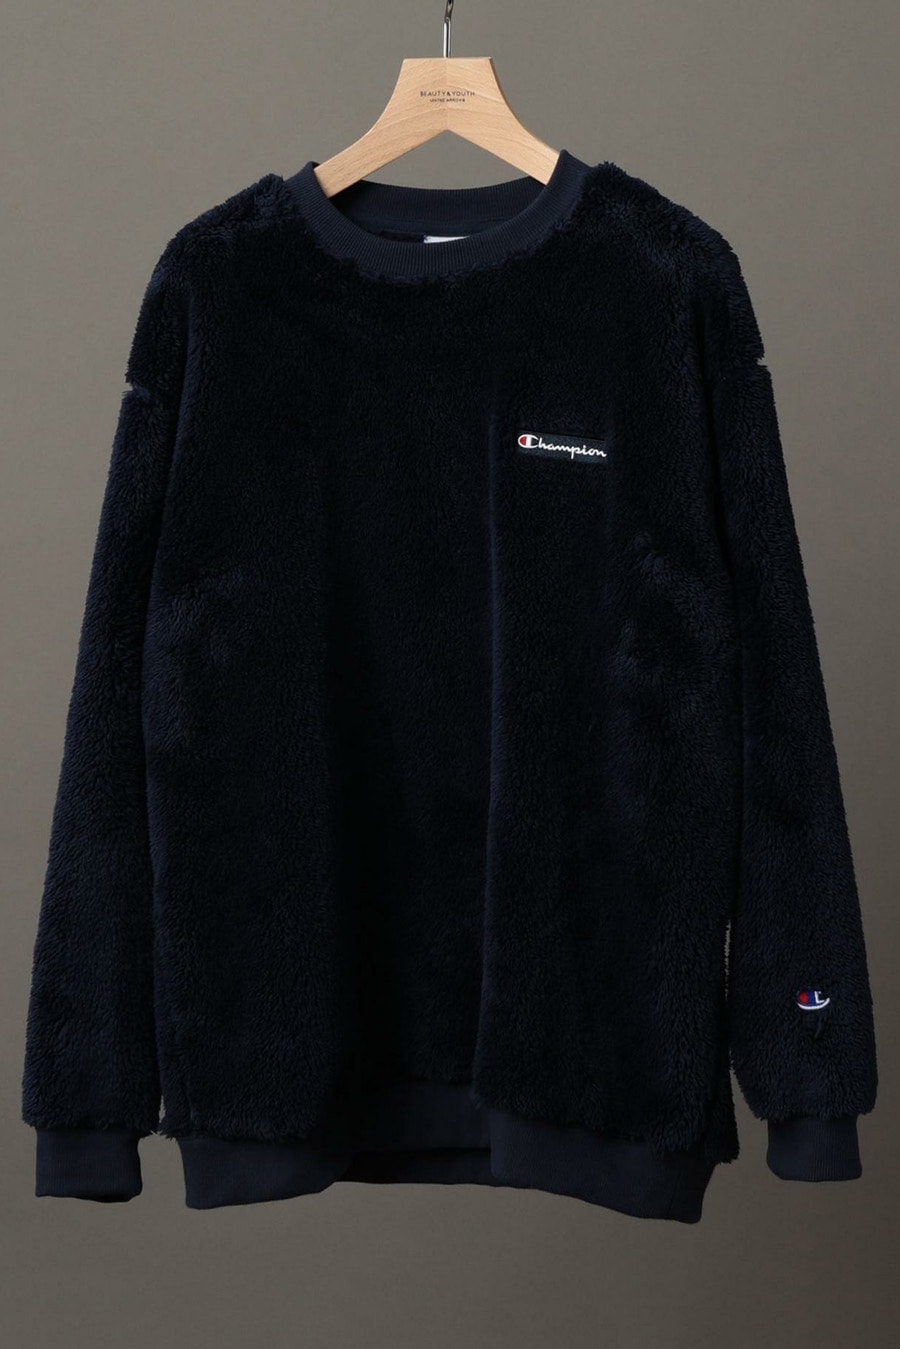 Champion Sweat Beauty And Youth Blanc Gris Noir